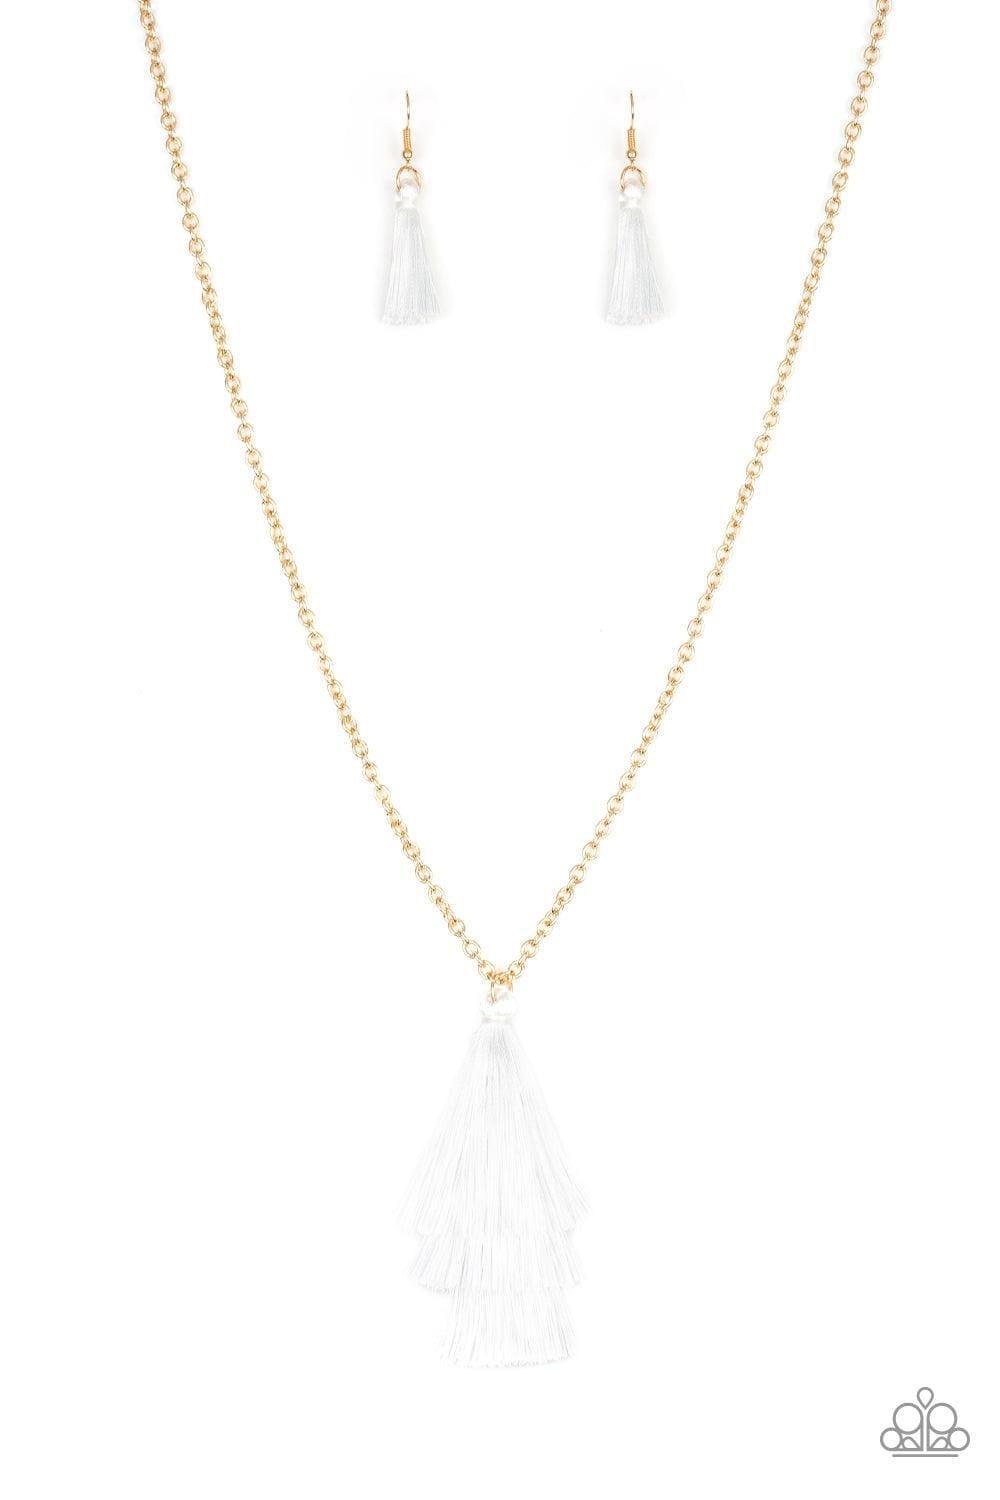 Paparazzi Accessories - Triple The Tassel - White Necklace - Bling by JessieK